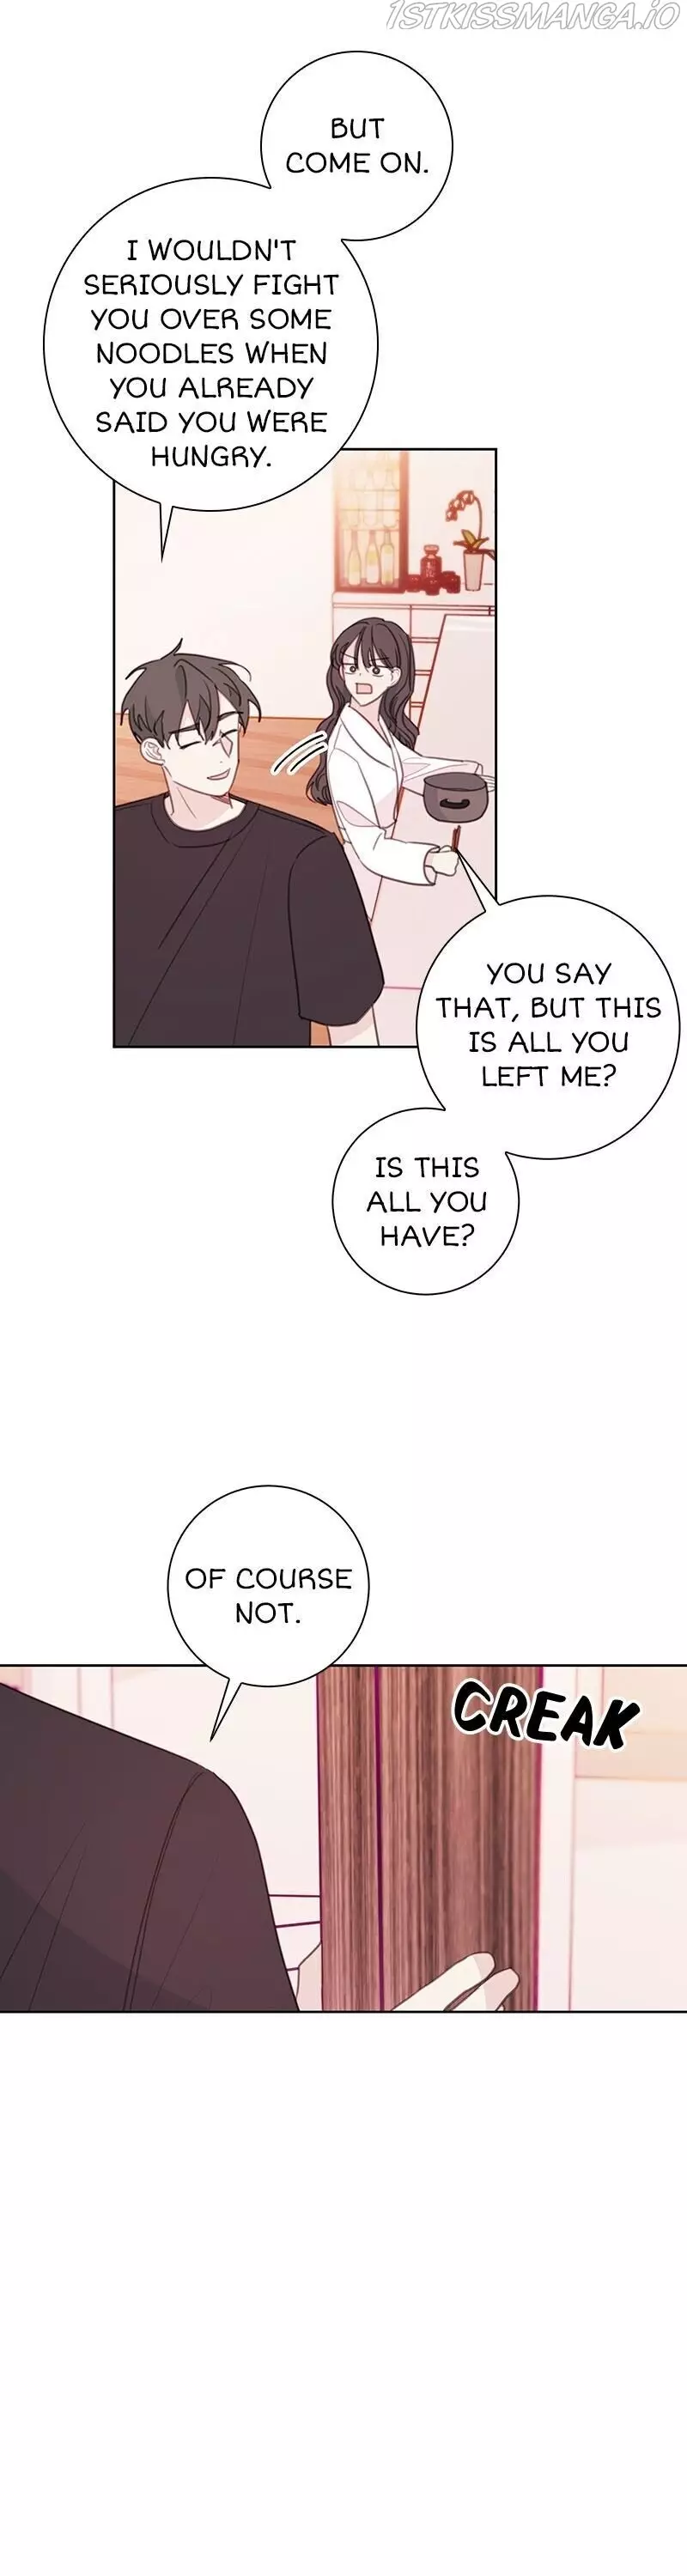 Today Living With You - 66 page 6-352255dd